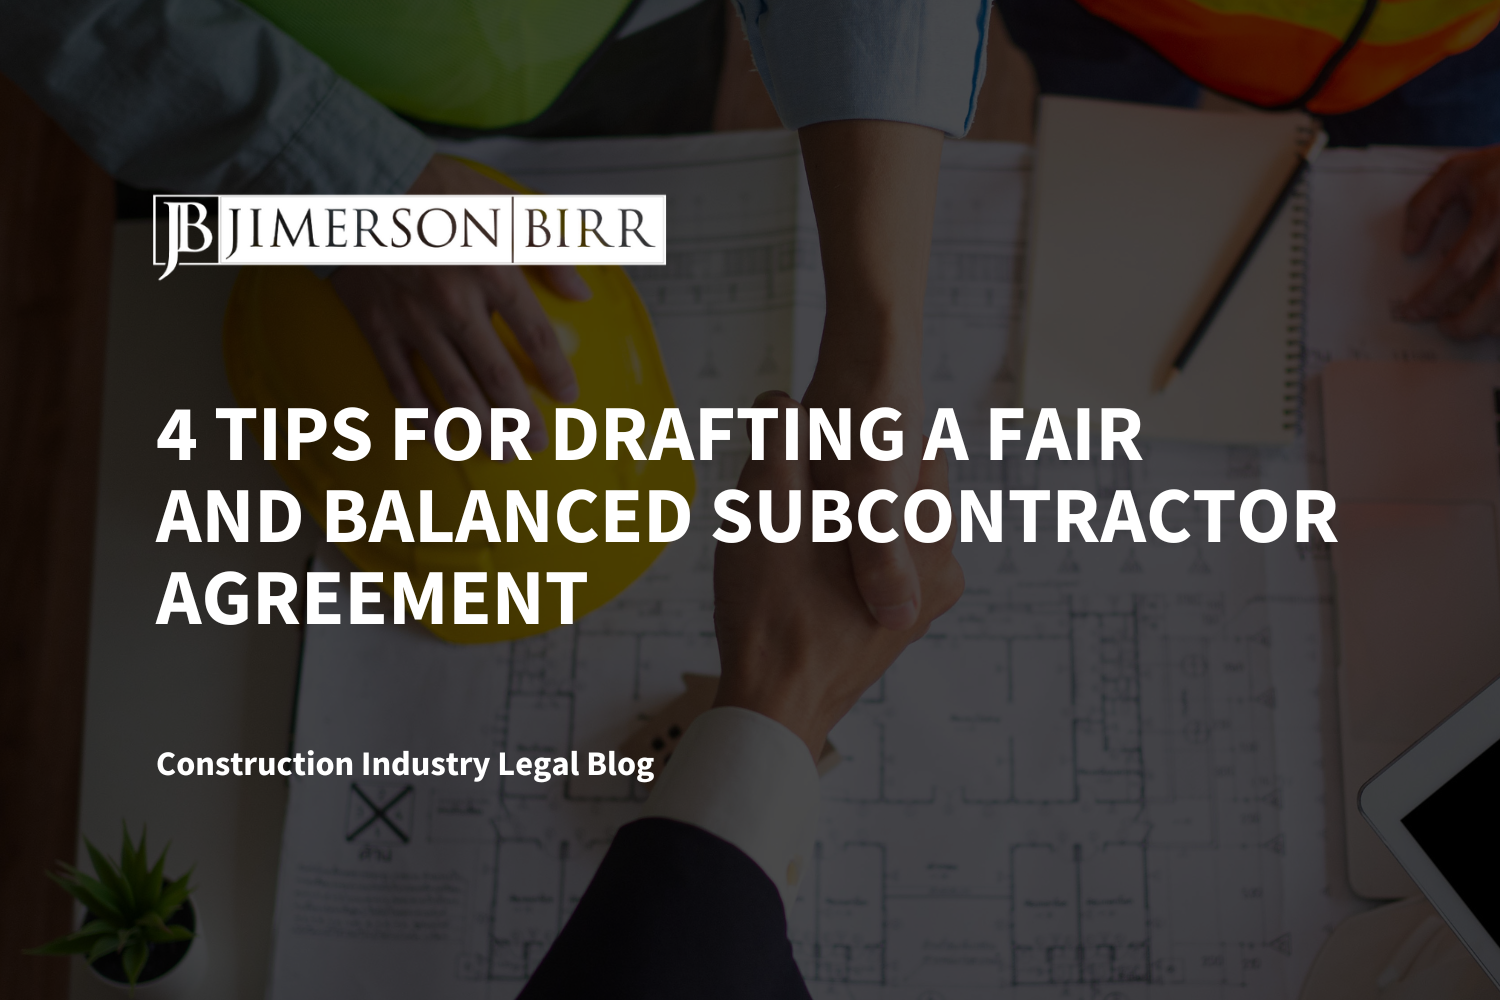 4 Tips for Drafting a Fair and Balanced Subcontractor Agreement